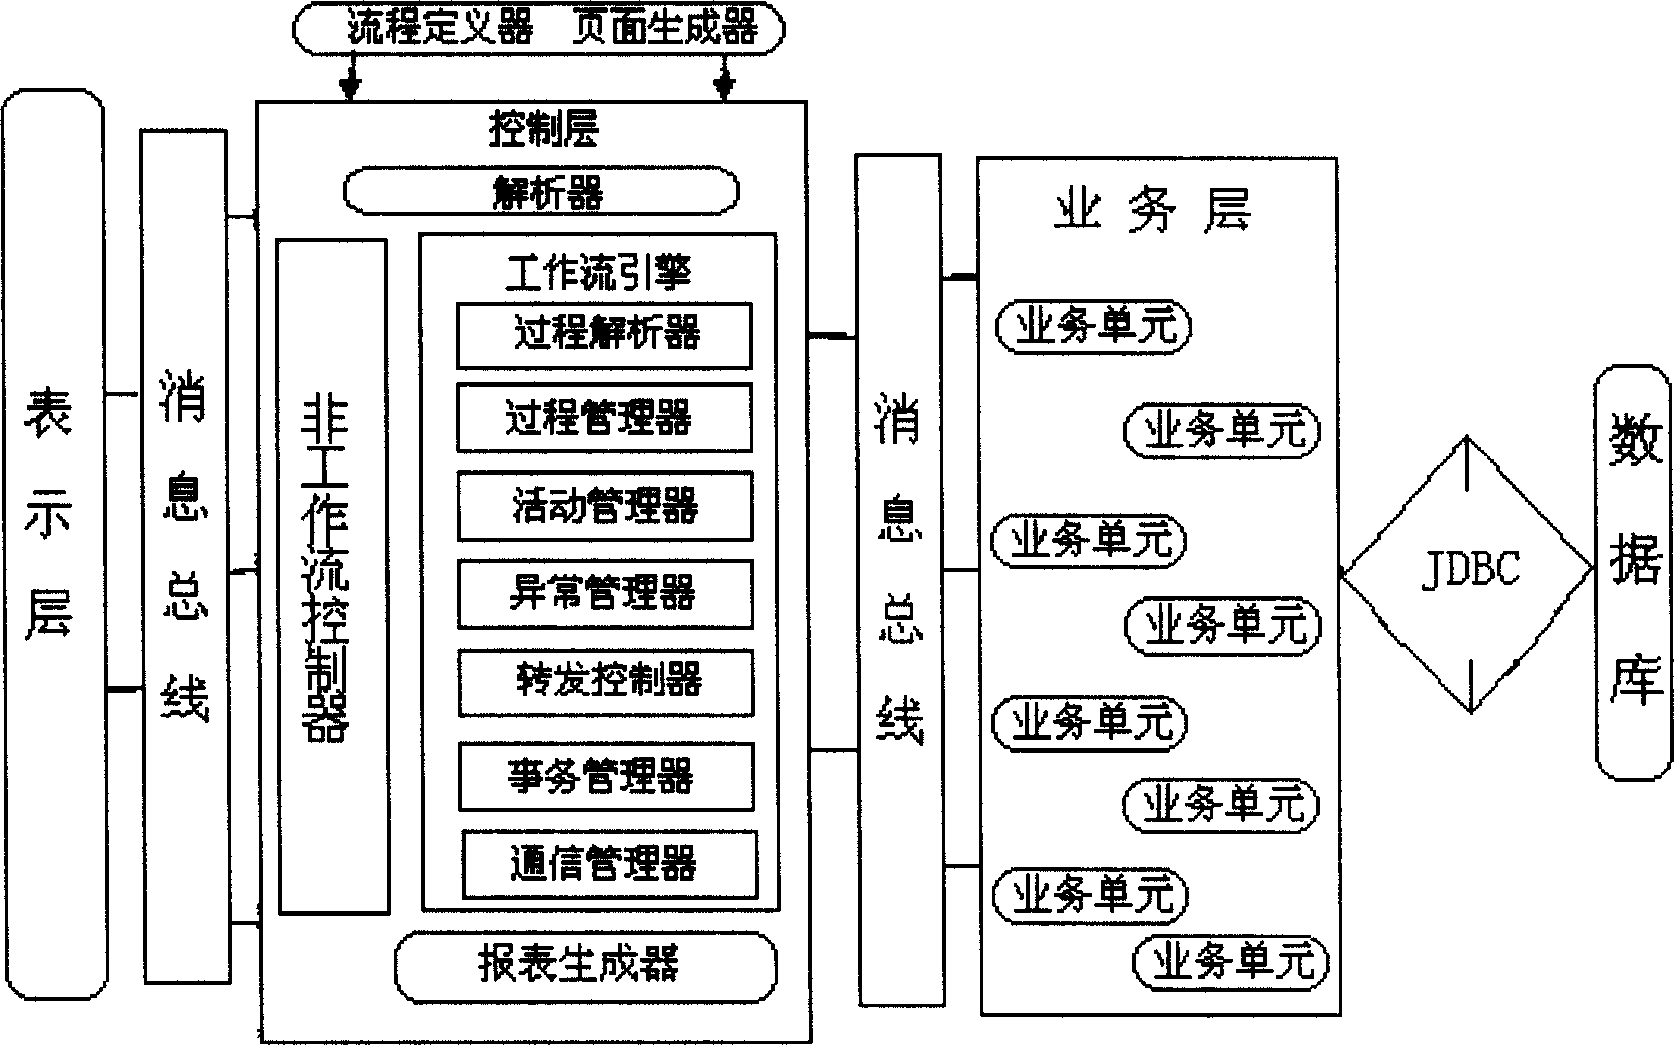 Bank credit operation processing system